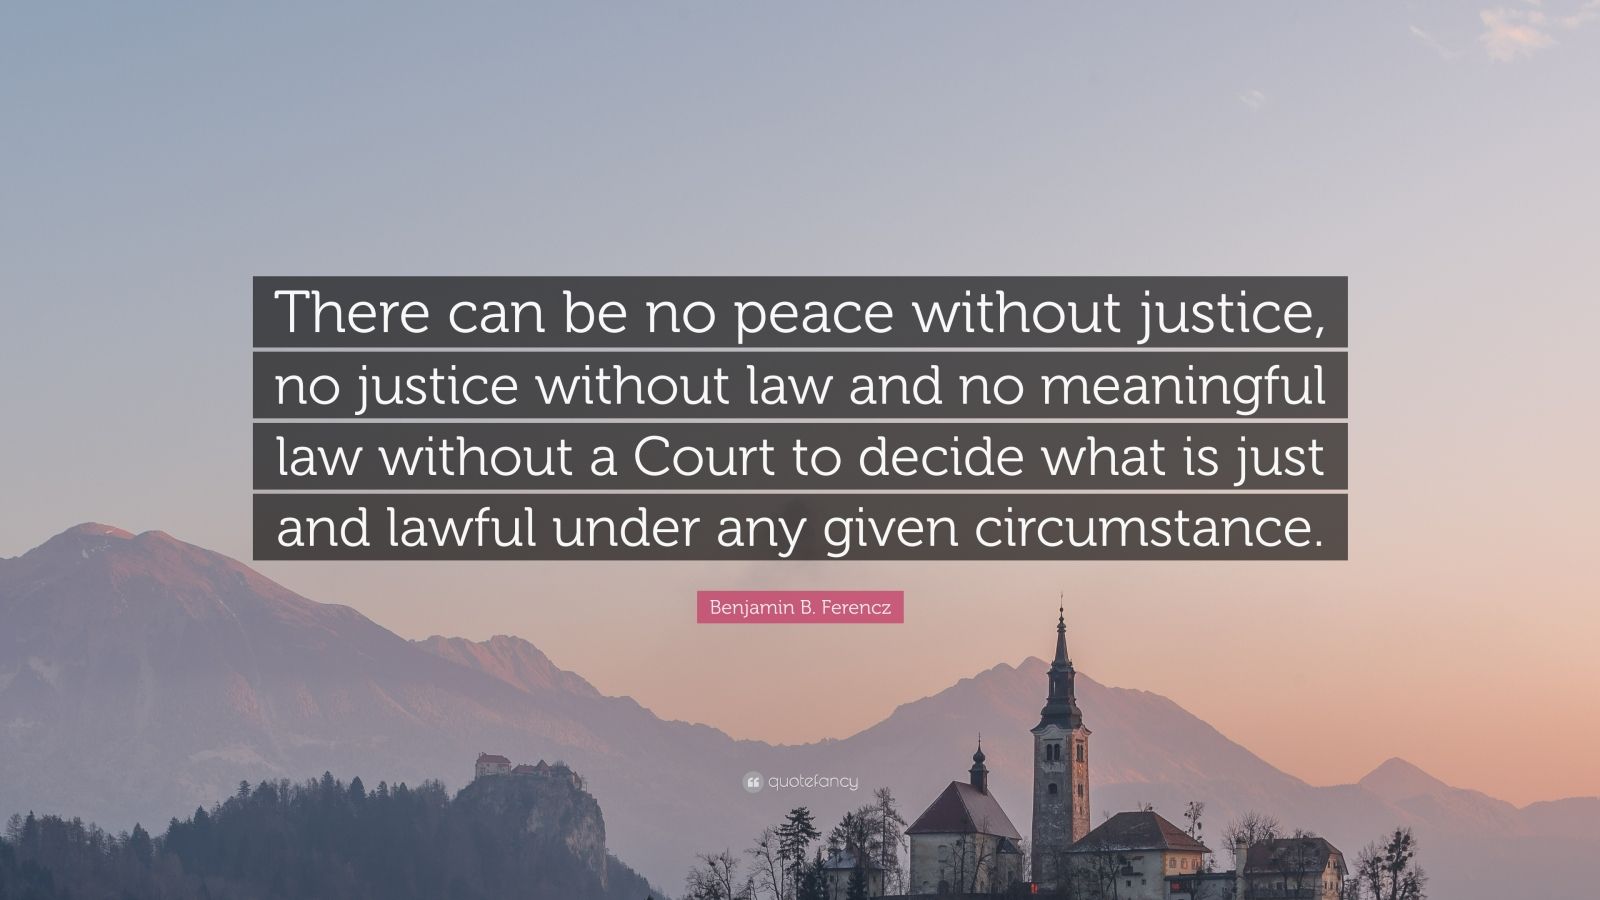 Benjamin B. Ferencz Quote: “There can be no peace without justice, no